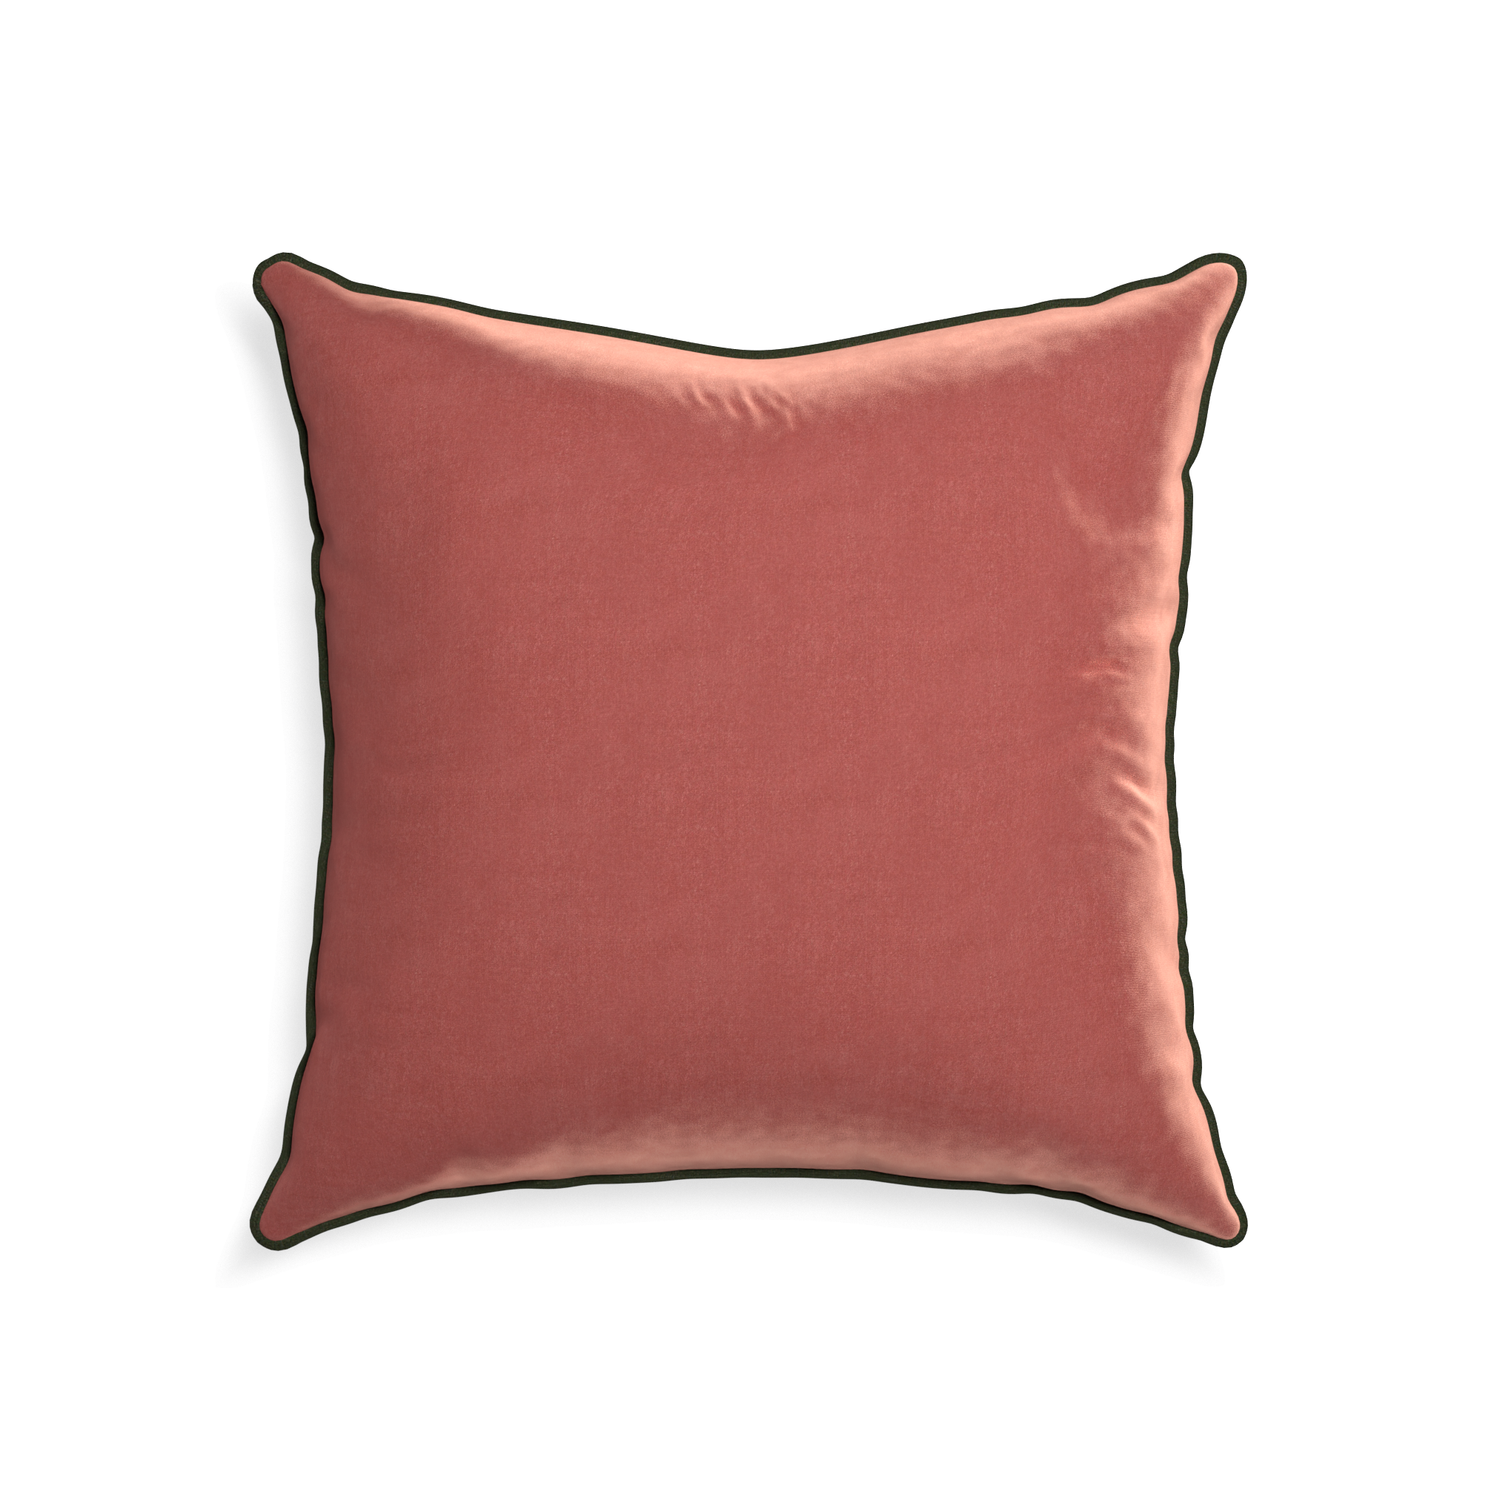 square coral velvet pillow with fern green piping